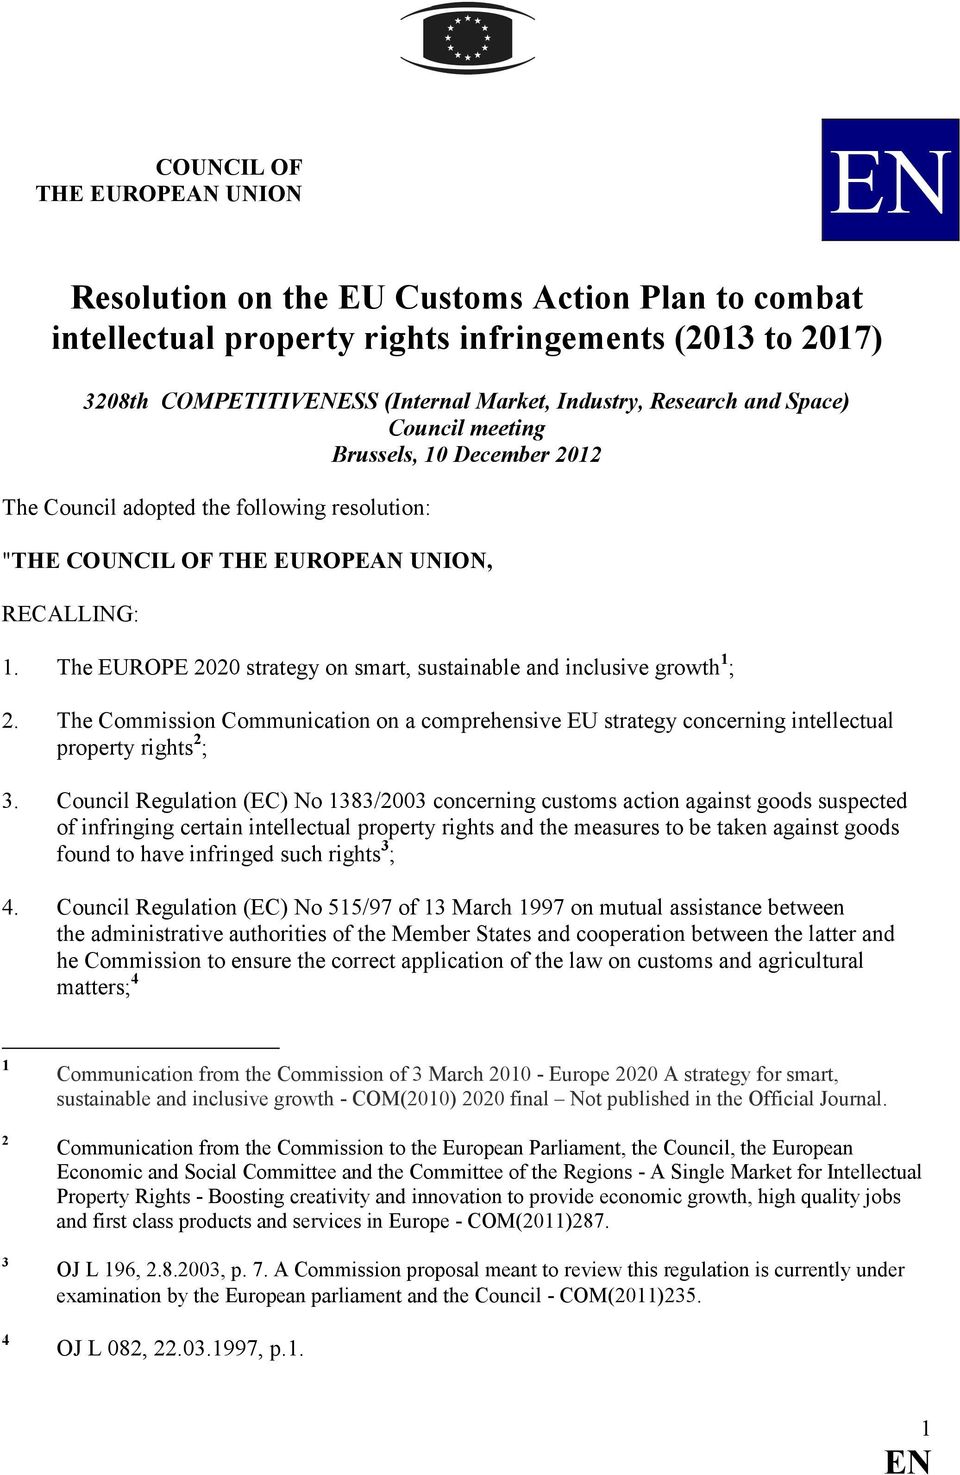 The EUROPE 2020 strategy on smart, sustainable and inclusive growth 1 ; 2. The Commission Communication on a comprehensive EU strategy concerning intellectual property rights 2 ; 3.